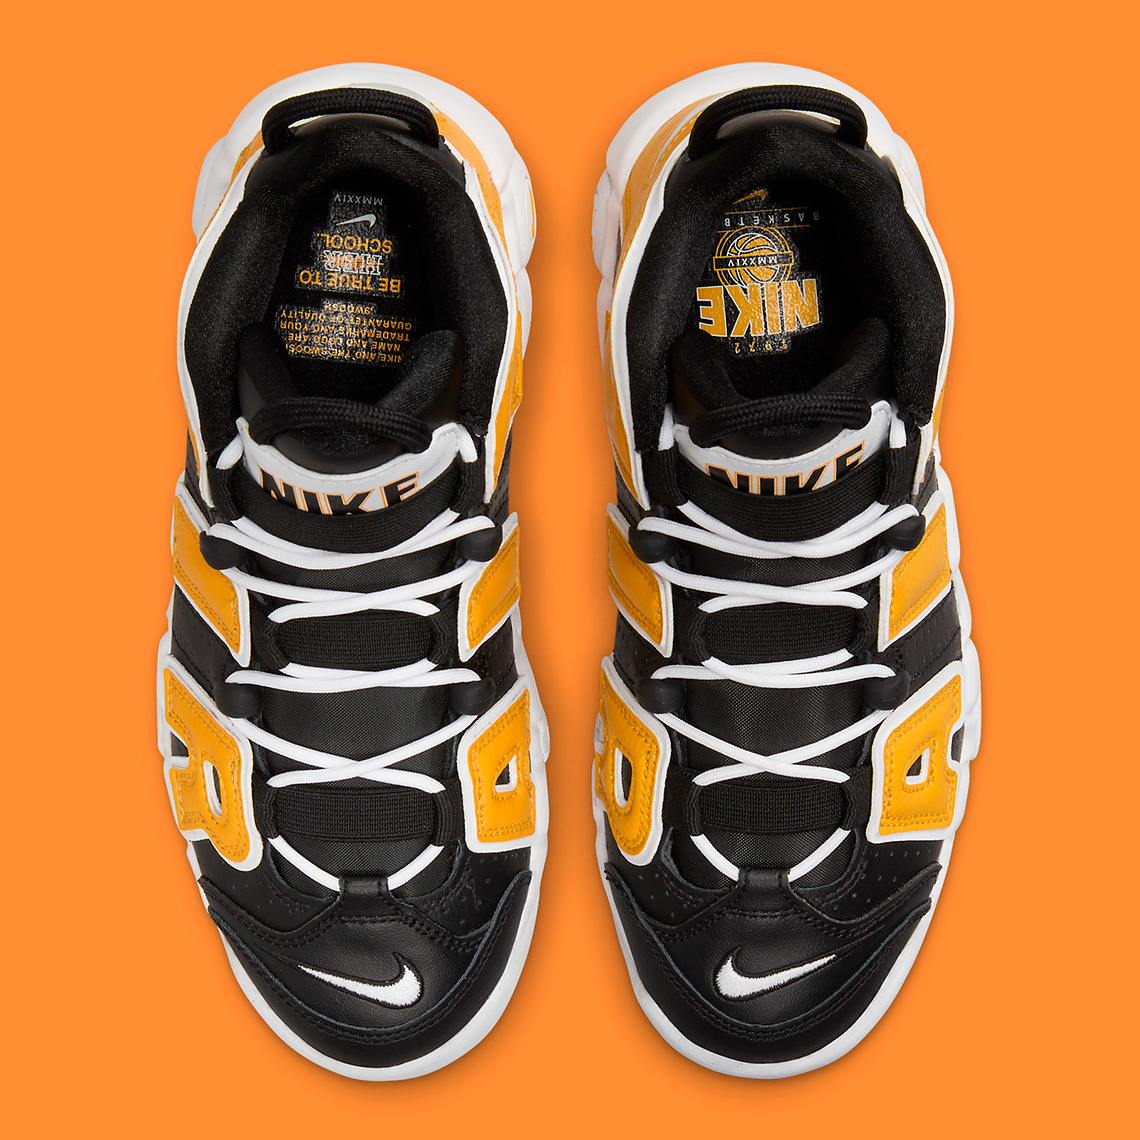 Nike Air More Uptempo Gs Be True To Her School Fn0262 001 5